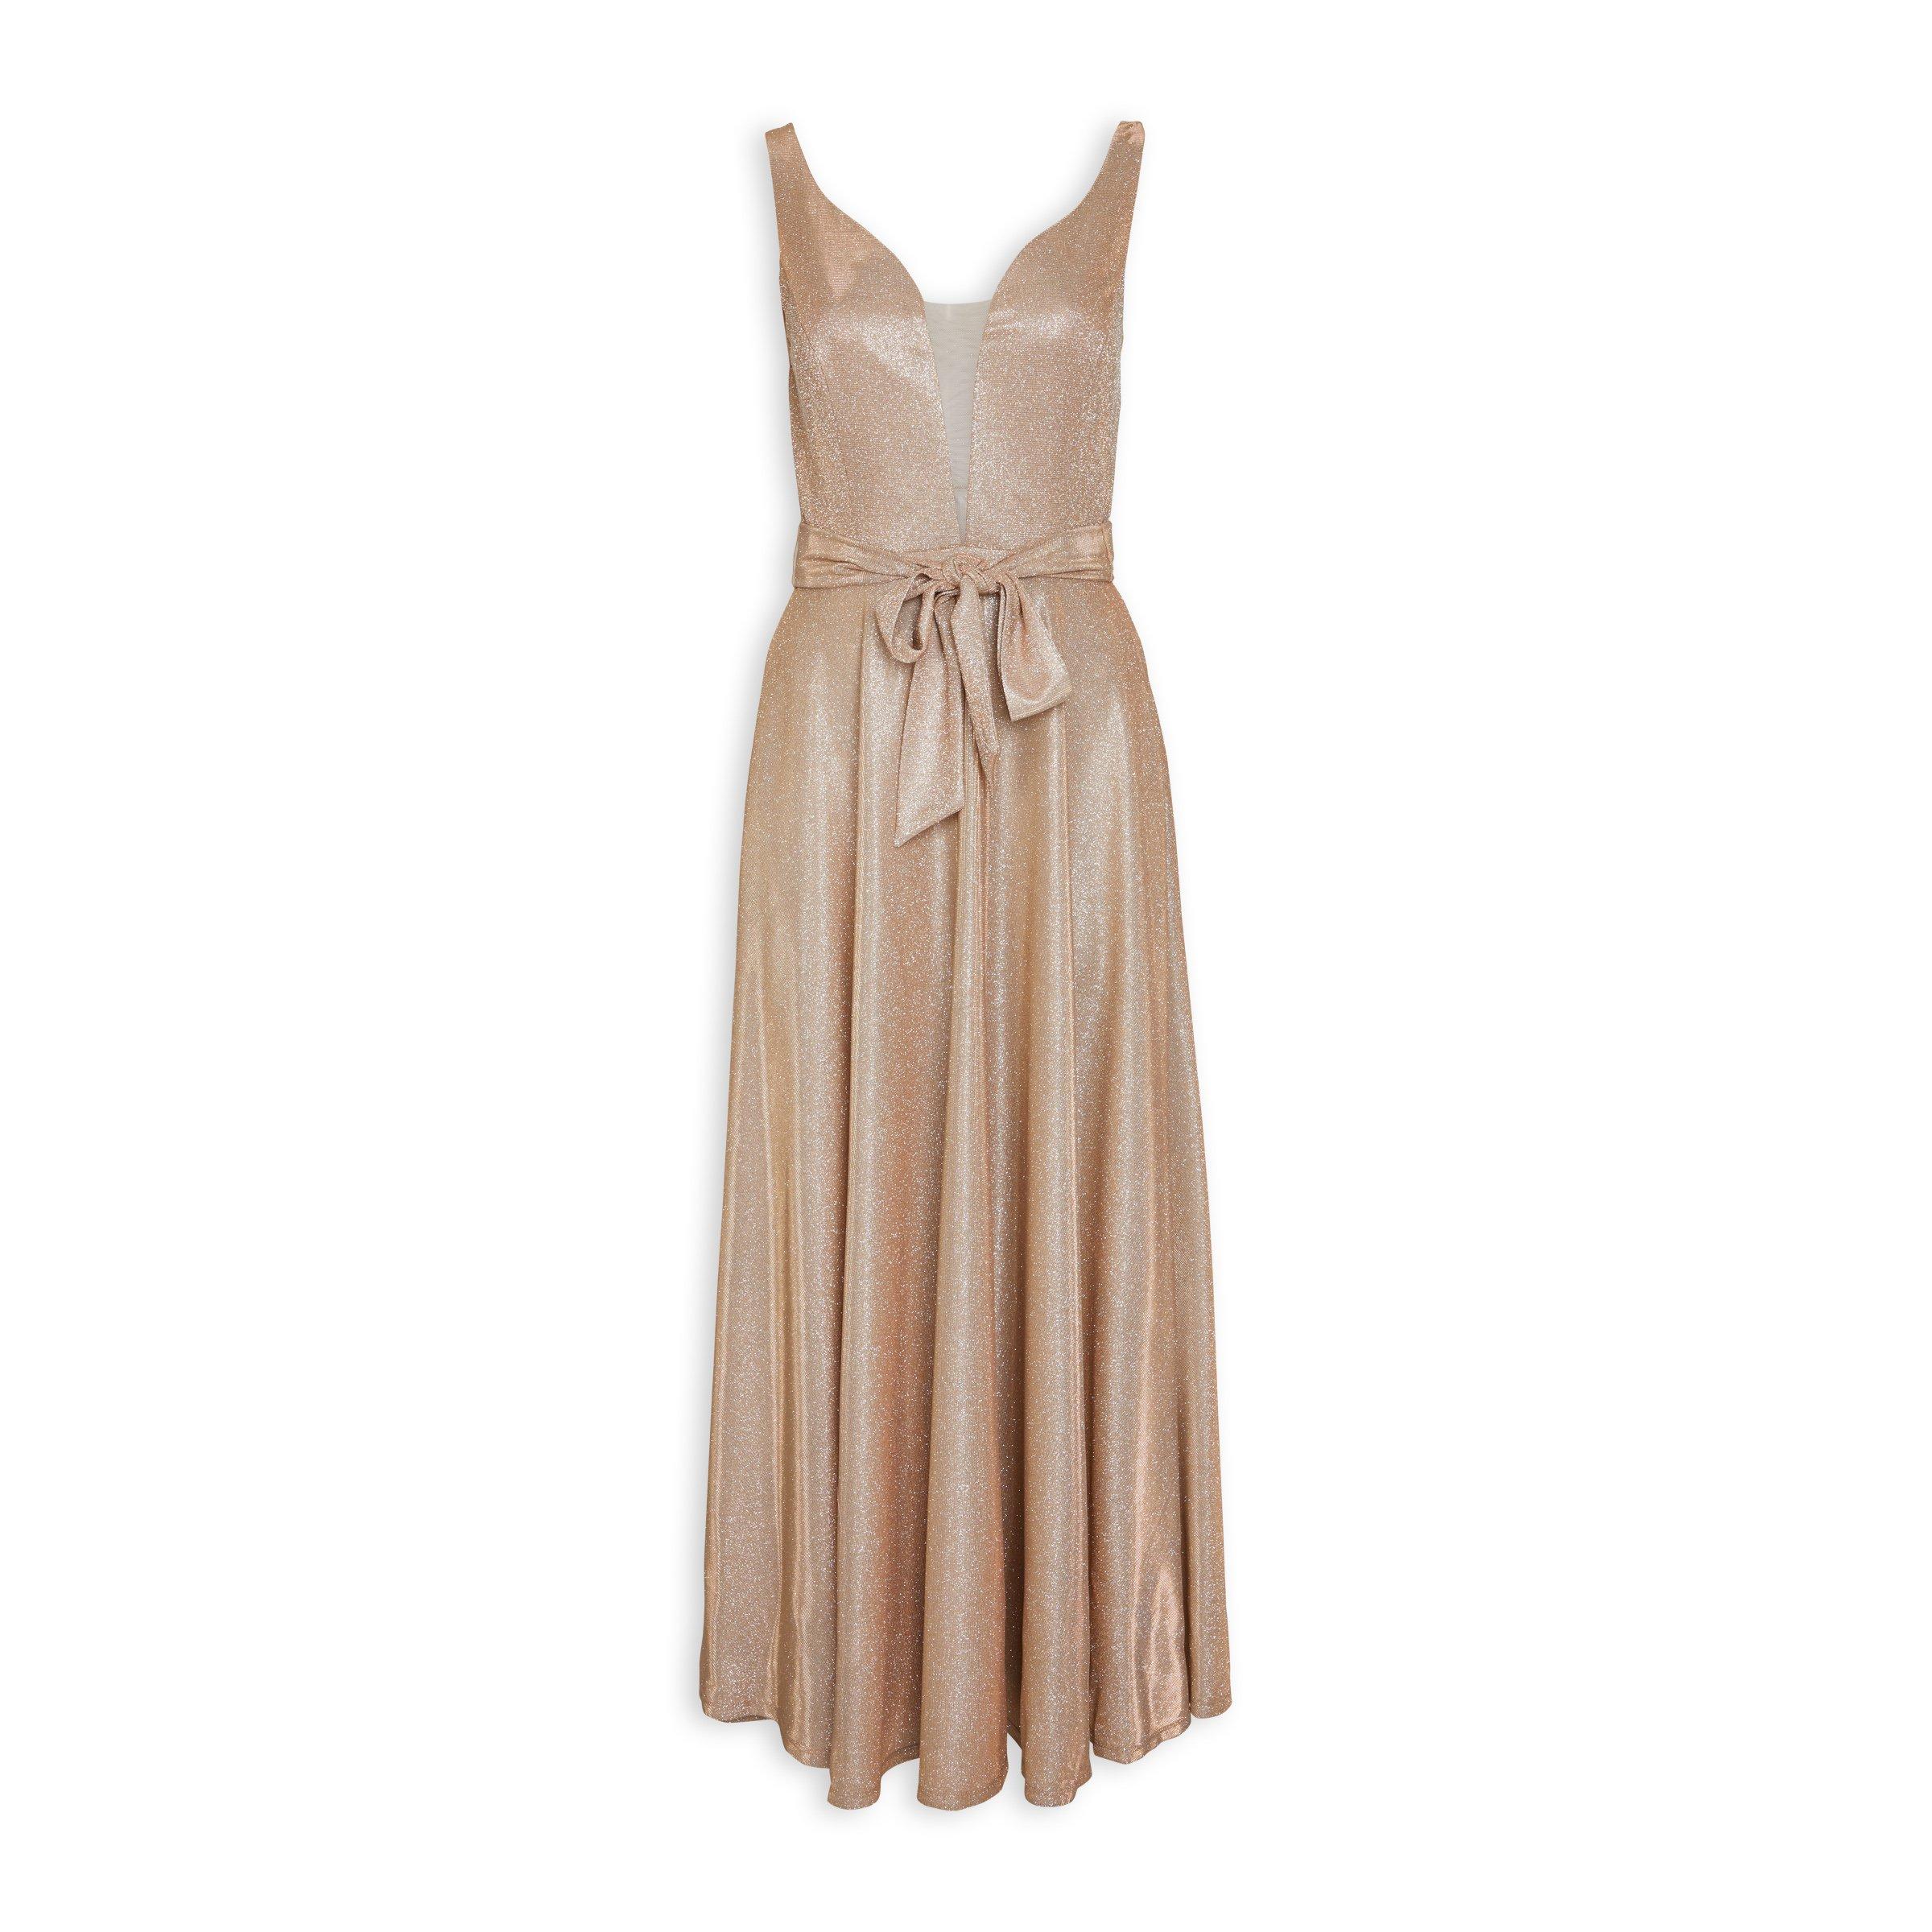 Nude Maxi Dress | peacecommission.kdsg.gov.ng